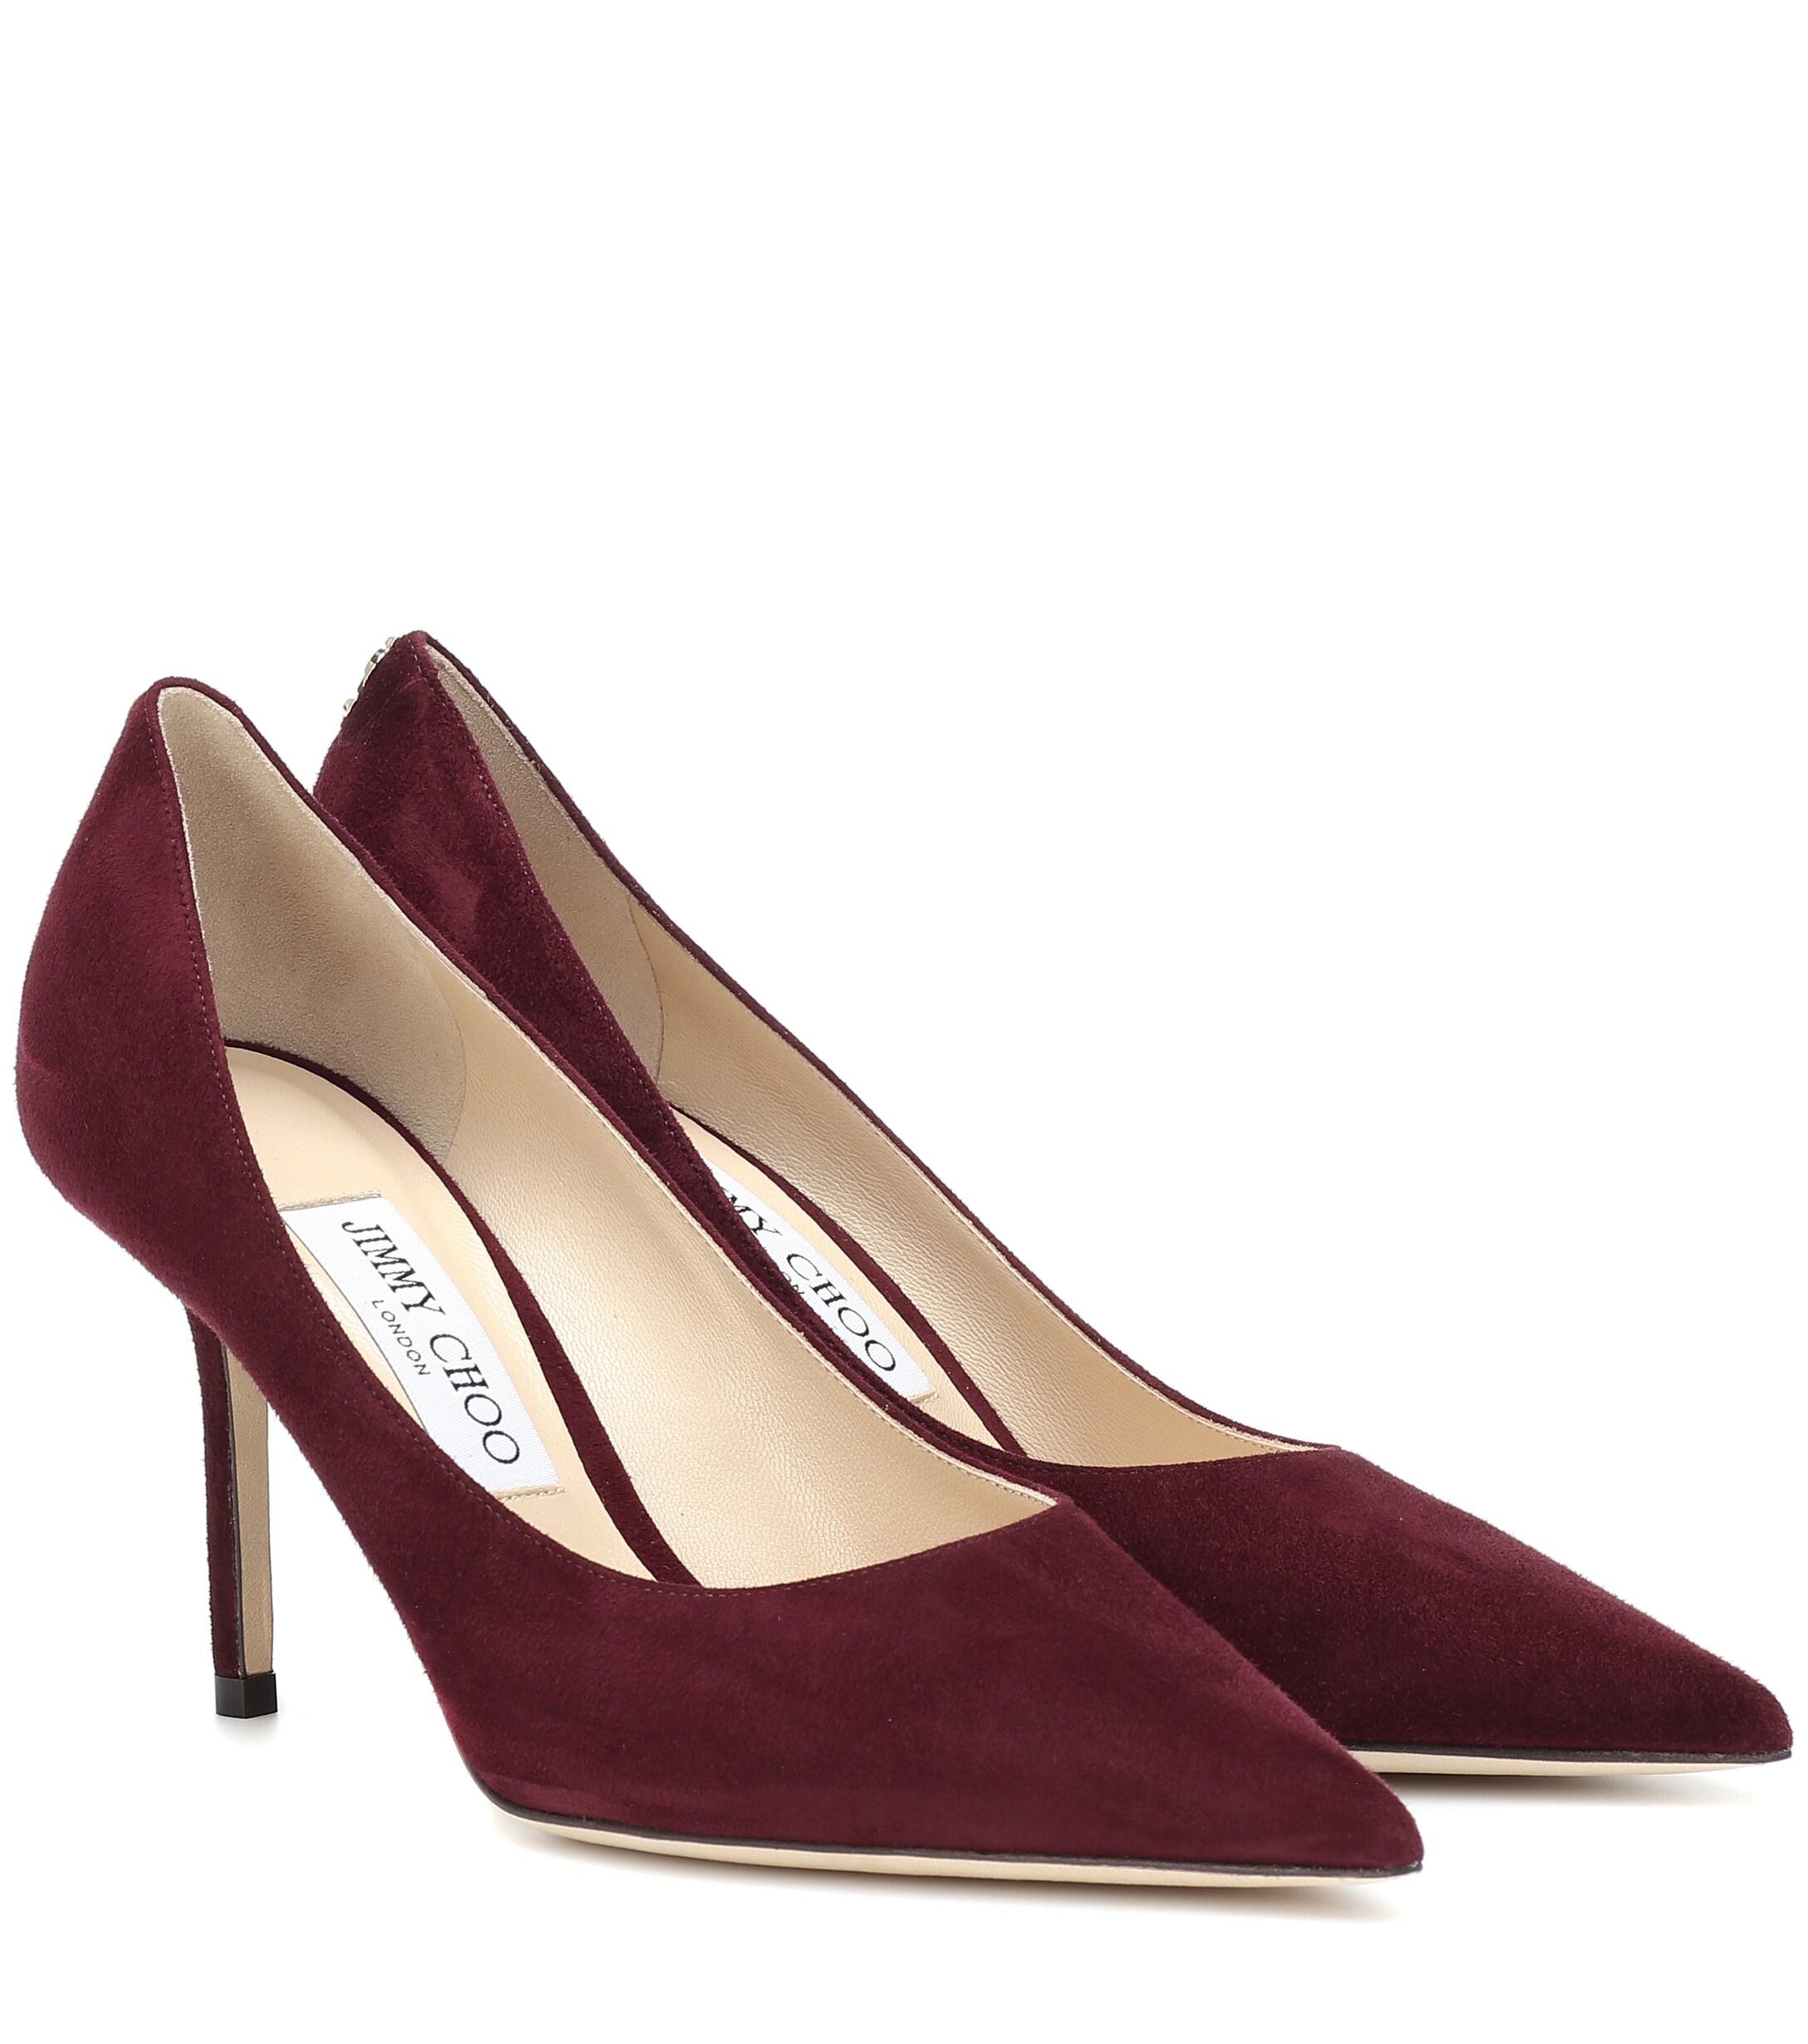 Jimmy Choo Love 85 Suede Pumps in Red - Save 6% - Lyst